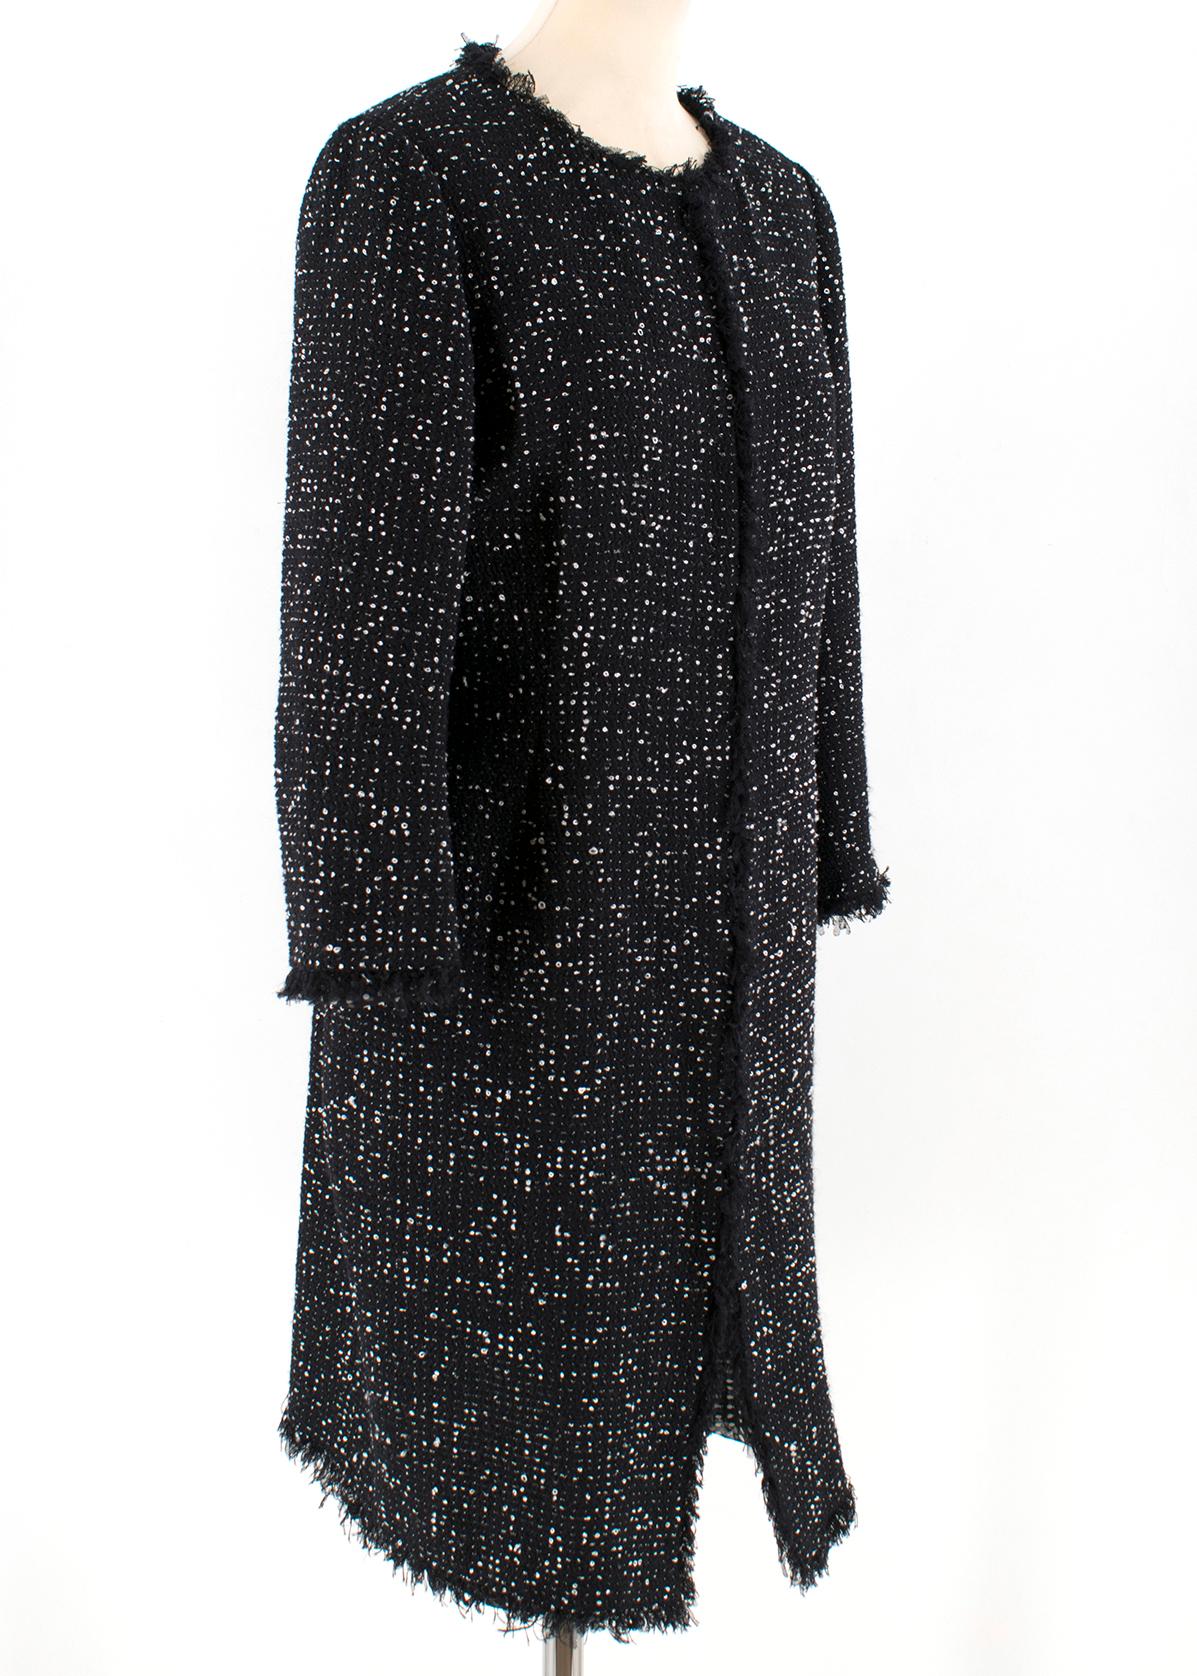 Giambattista Valli Black Boucle Tweed Jacket

- Open-Front Duster
- Black and white tweed
- A self fringe trim 
- Fully lined in silk chiffon
- V-neckline
- Long sleeves
- Hook-and-eye closure


Approx.
Measurements are taken laying flat, seam to